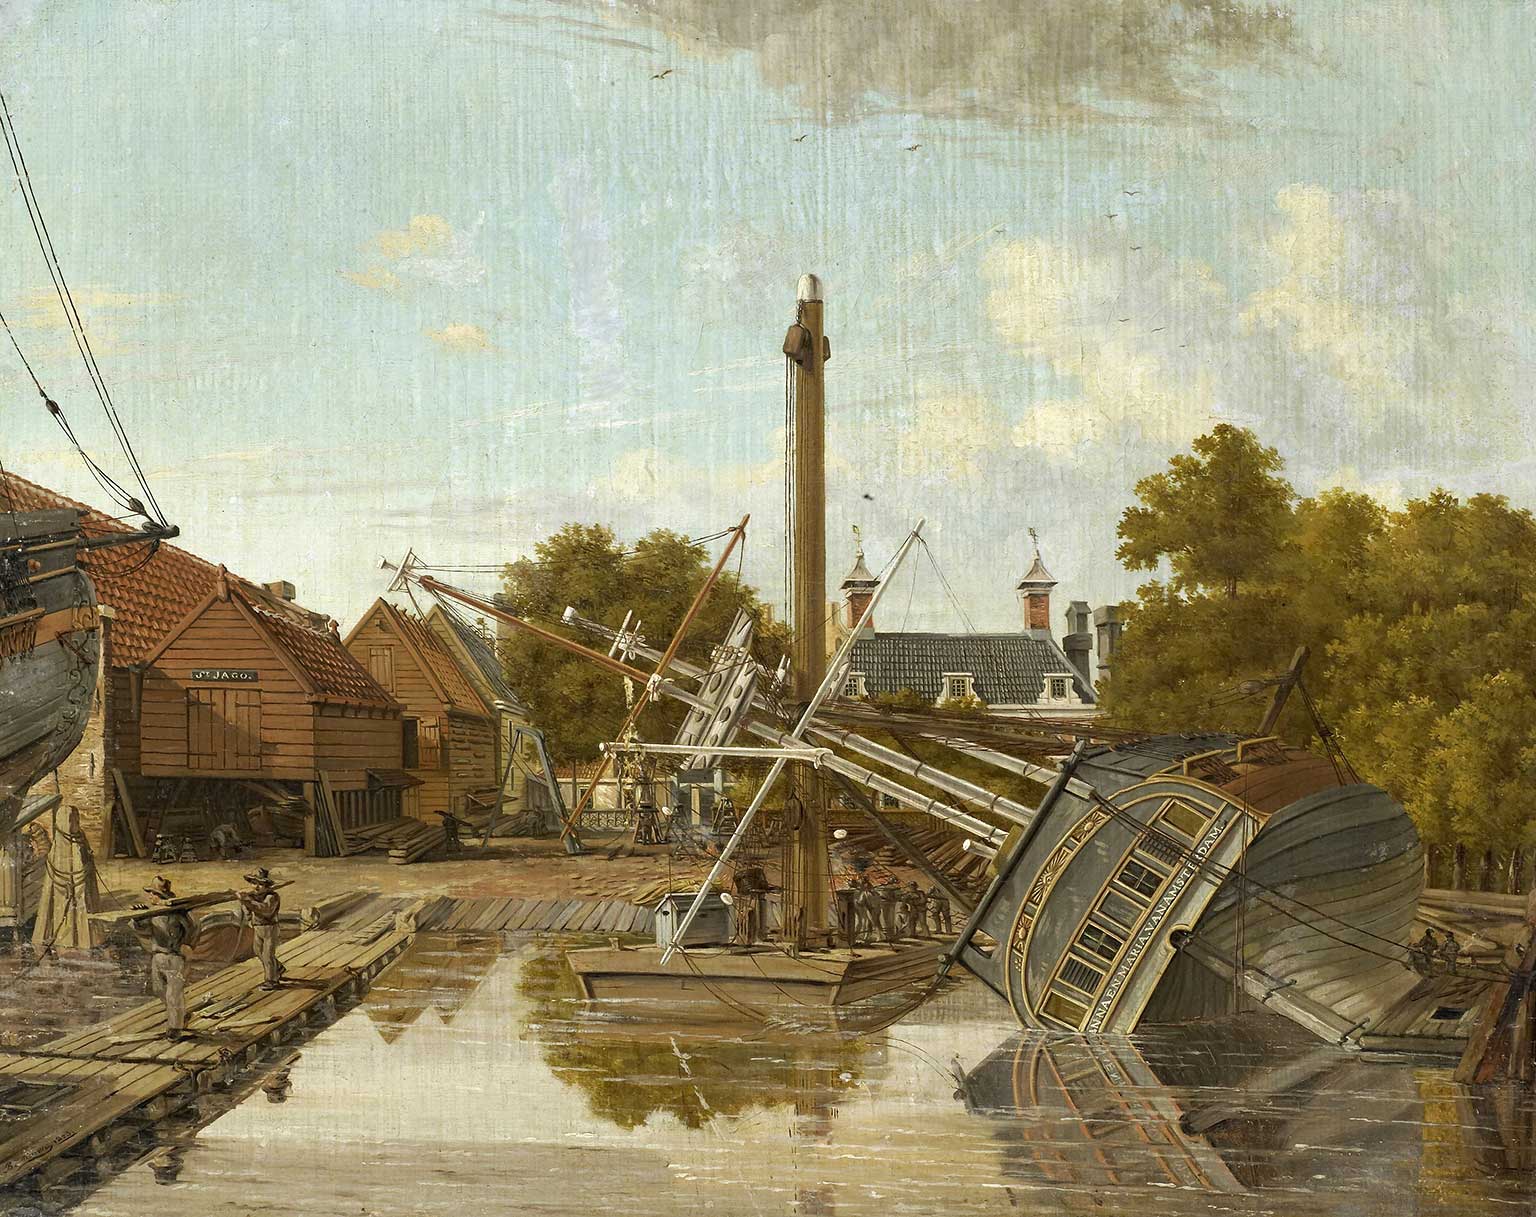 Painting of Shipyard St. Jago on Bickerseiland, Amsterdam, by Pieter Godfried Bertichen